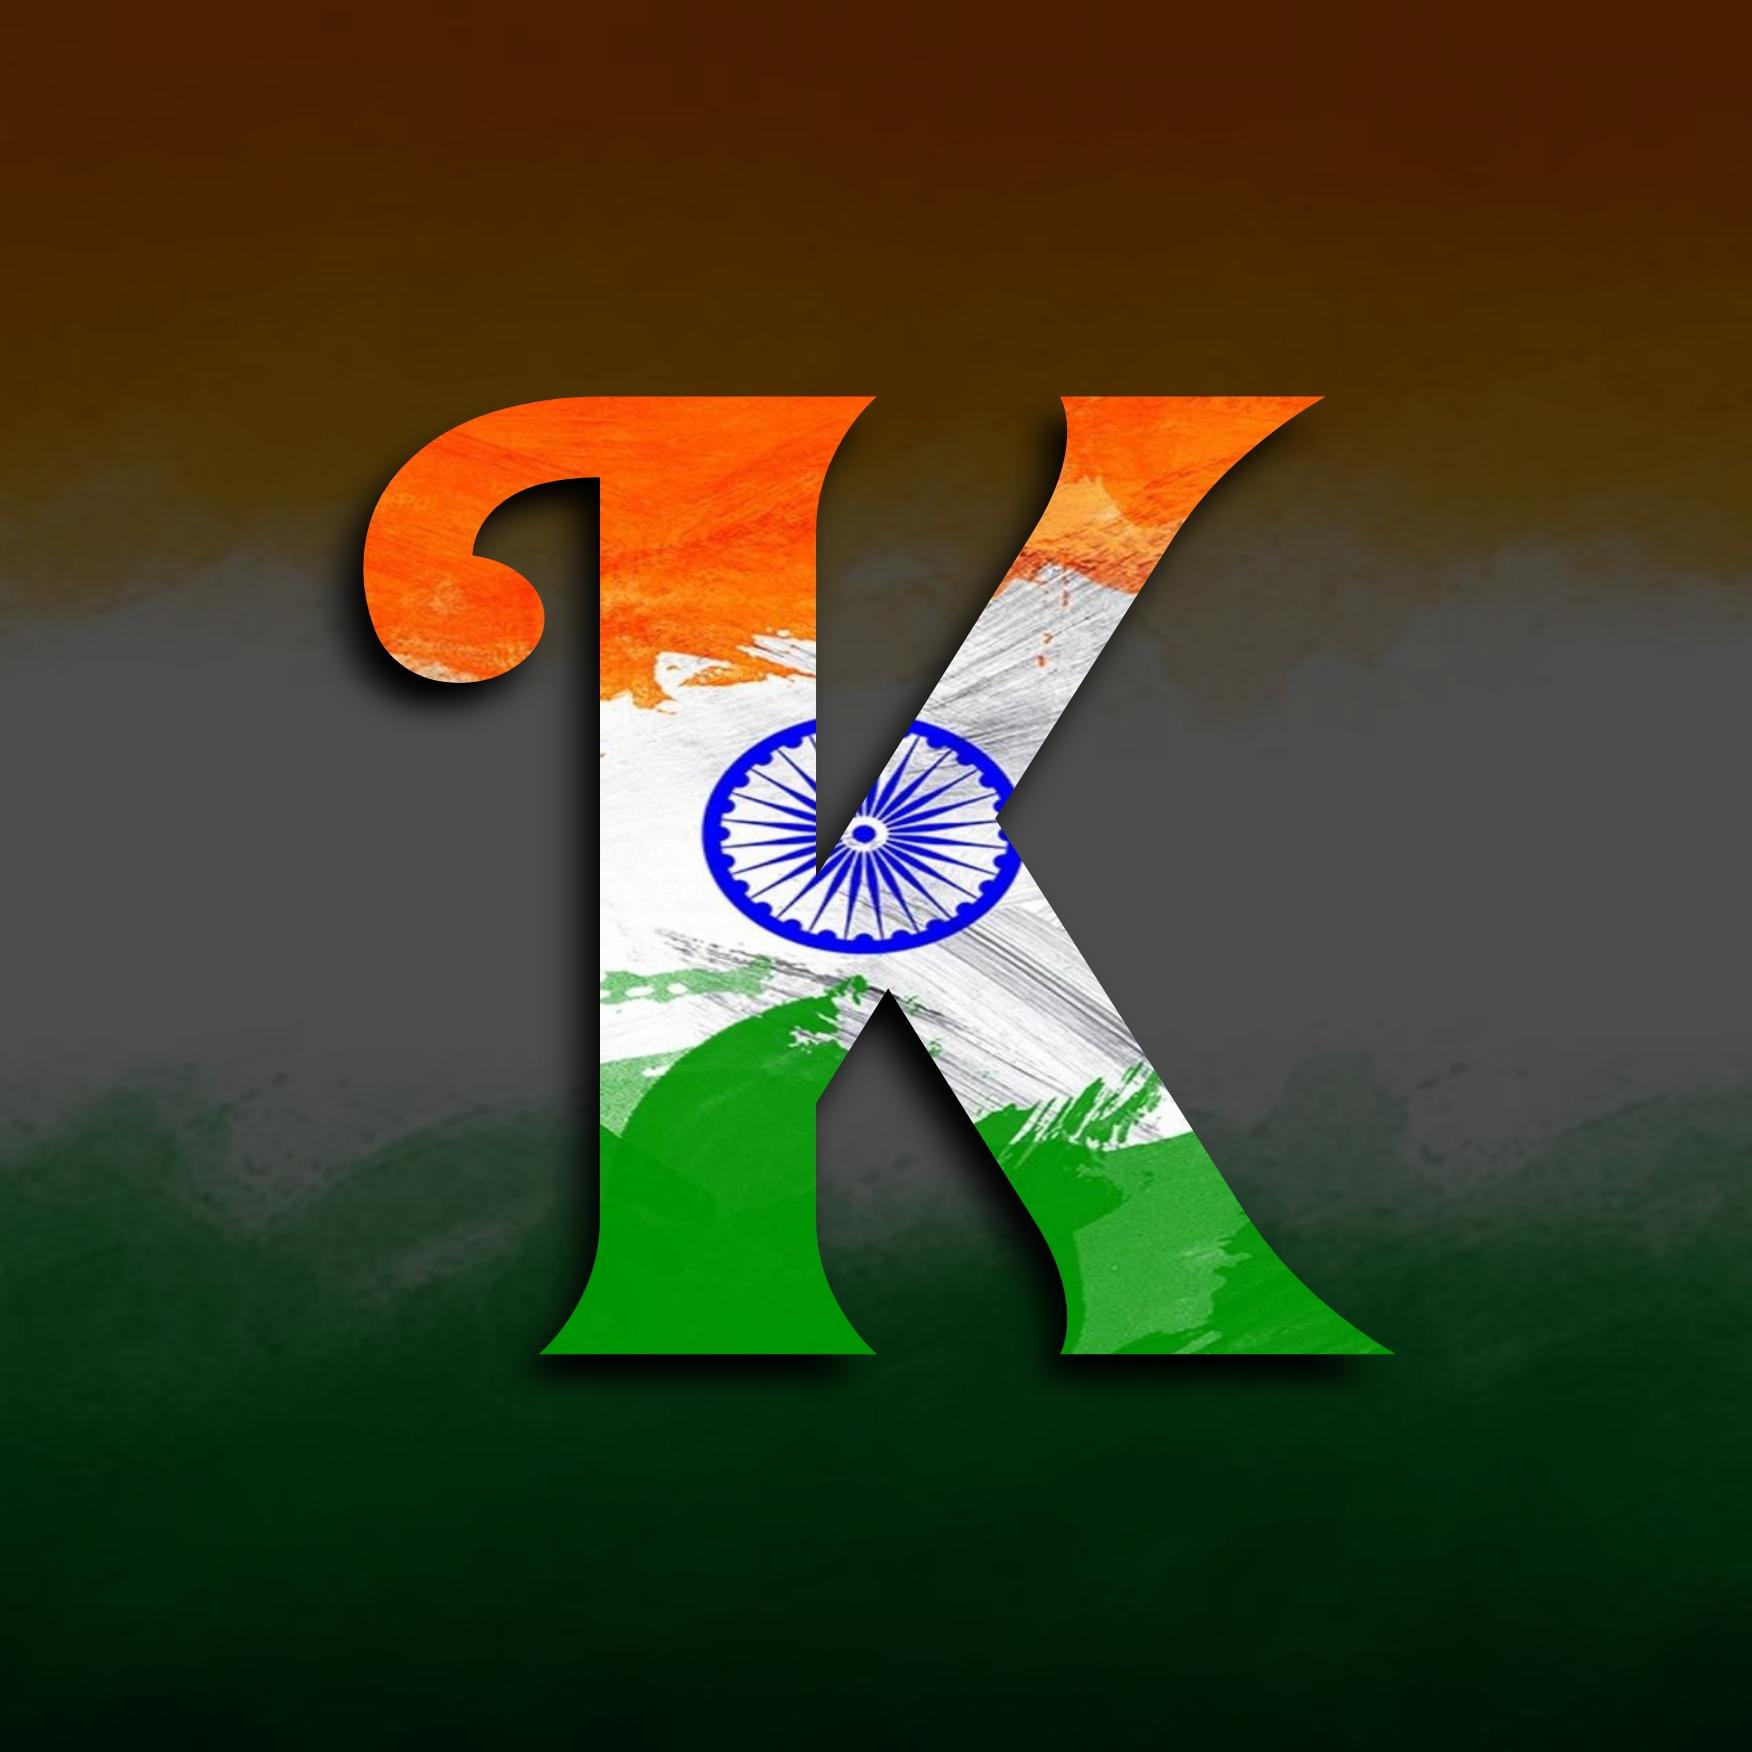 I Love India Profile Name And Photo Add Republic Day Pictures